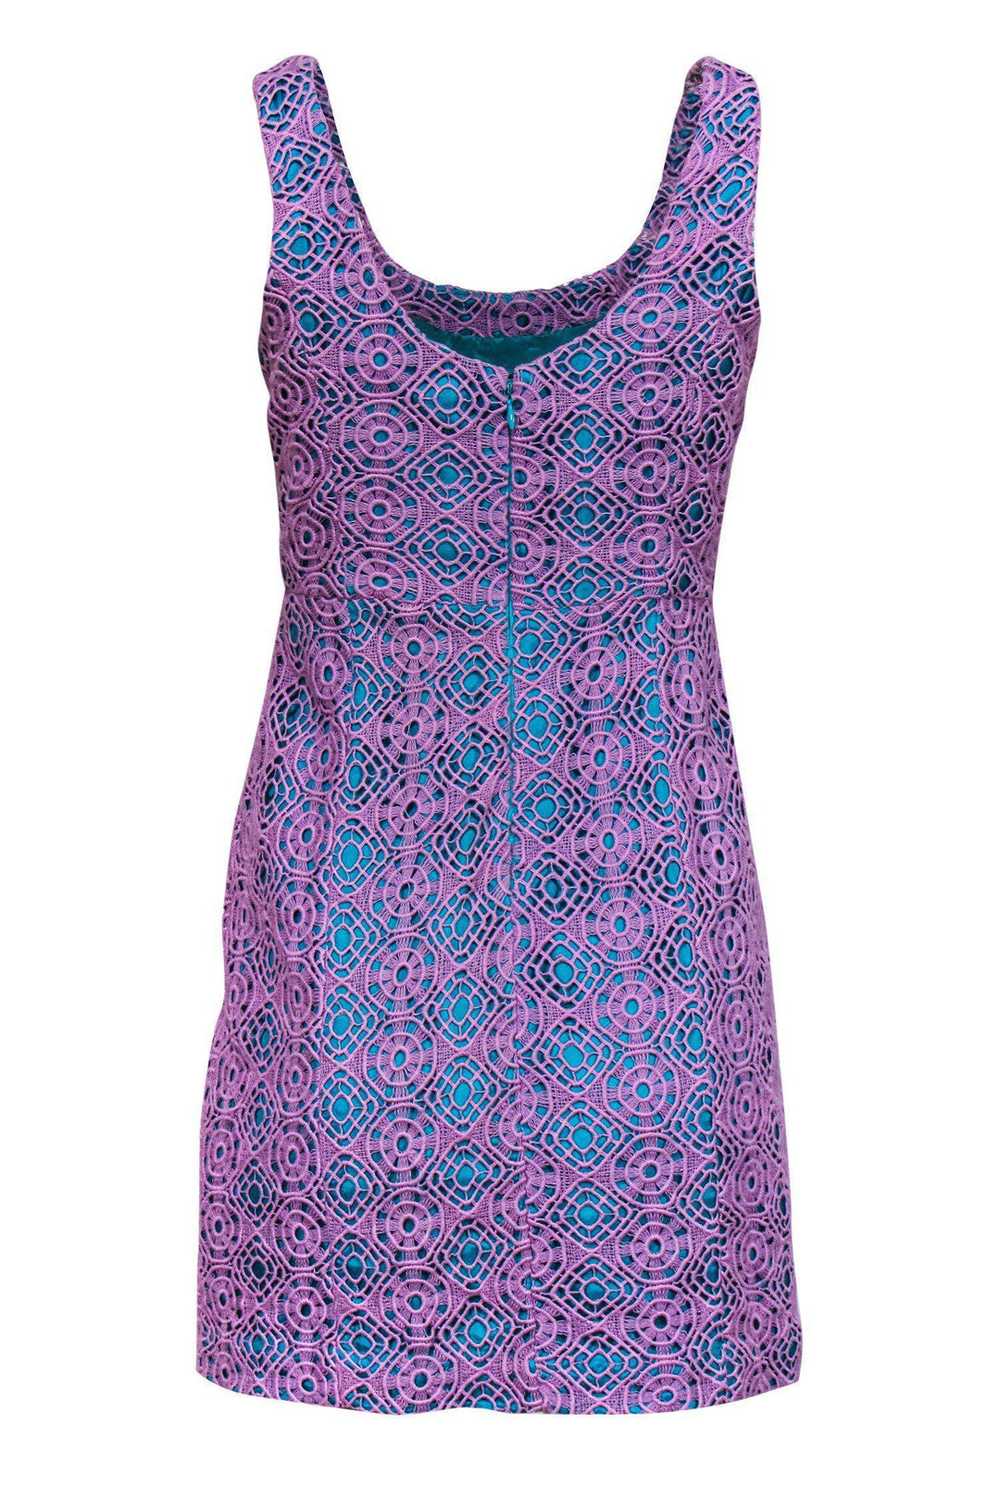 Tracy Reese - Purple & Teal Lace Dress Sz 6 - image 3